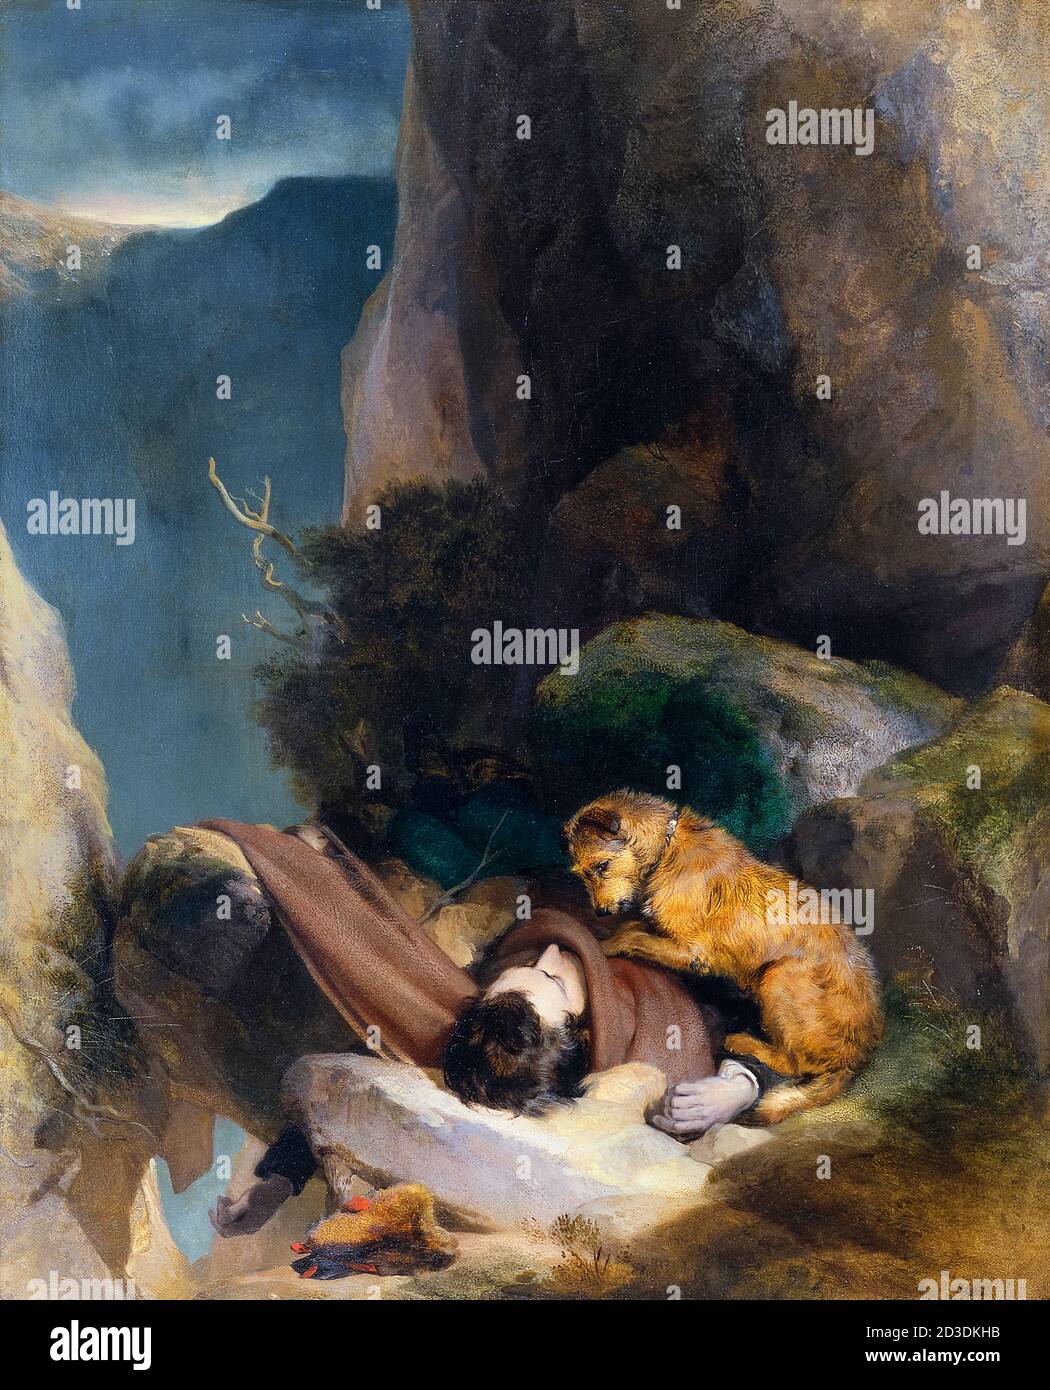 Edwin Landseer Painting High Resolution Stock Photography And Images Alamy